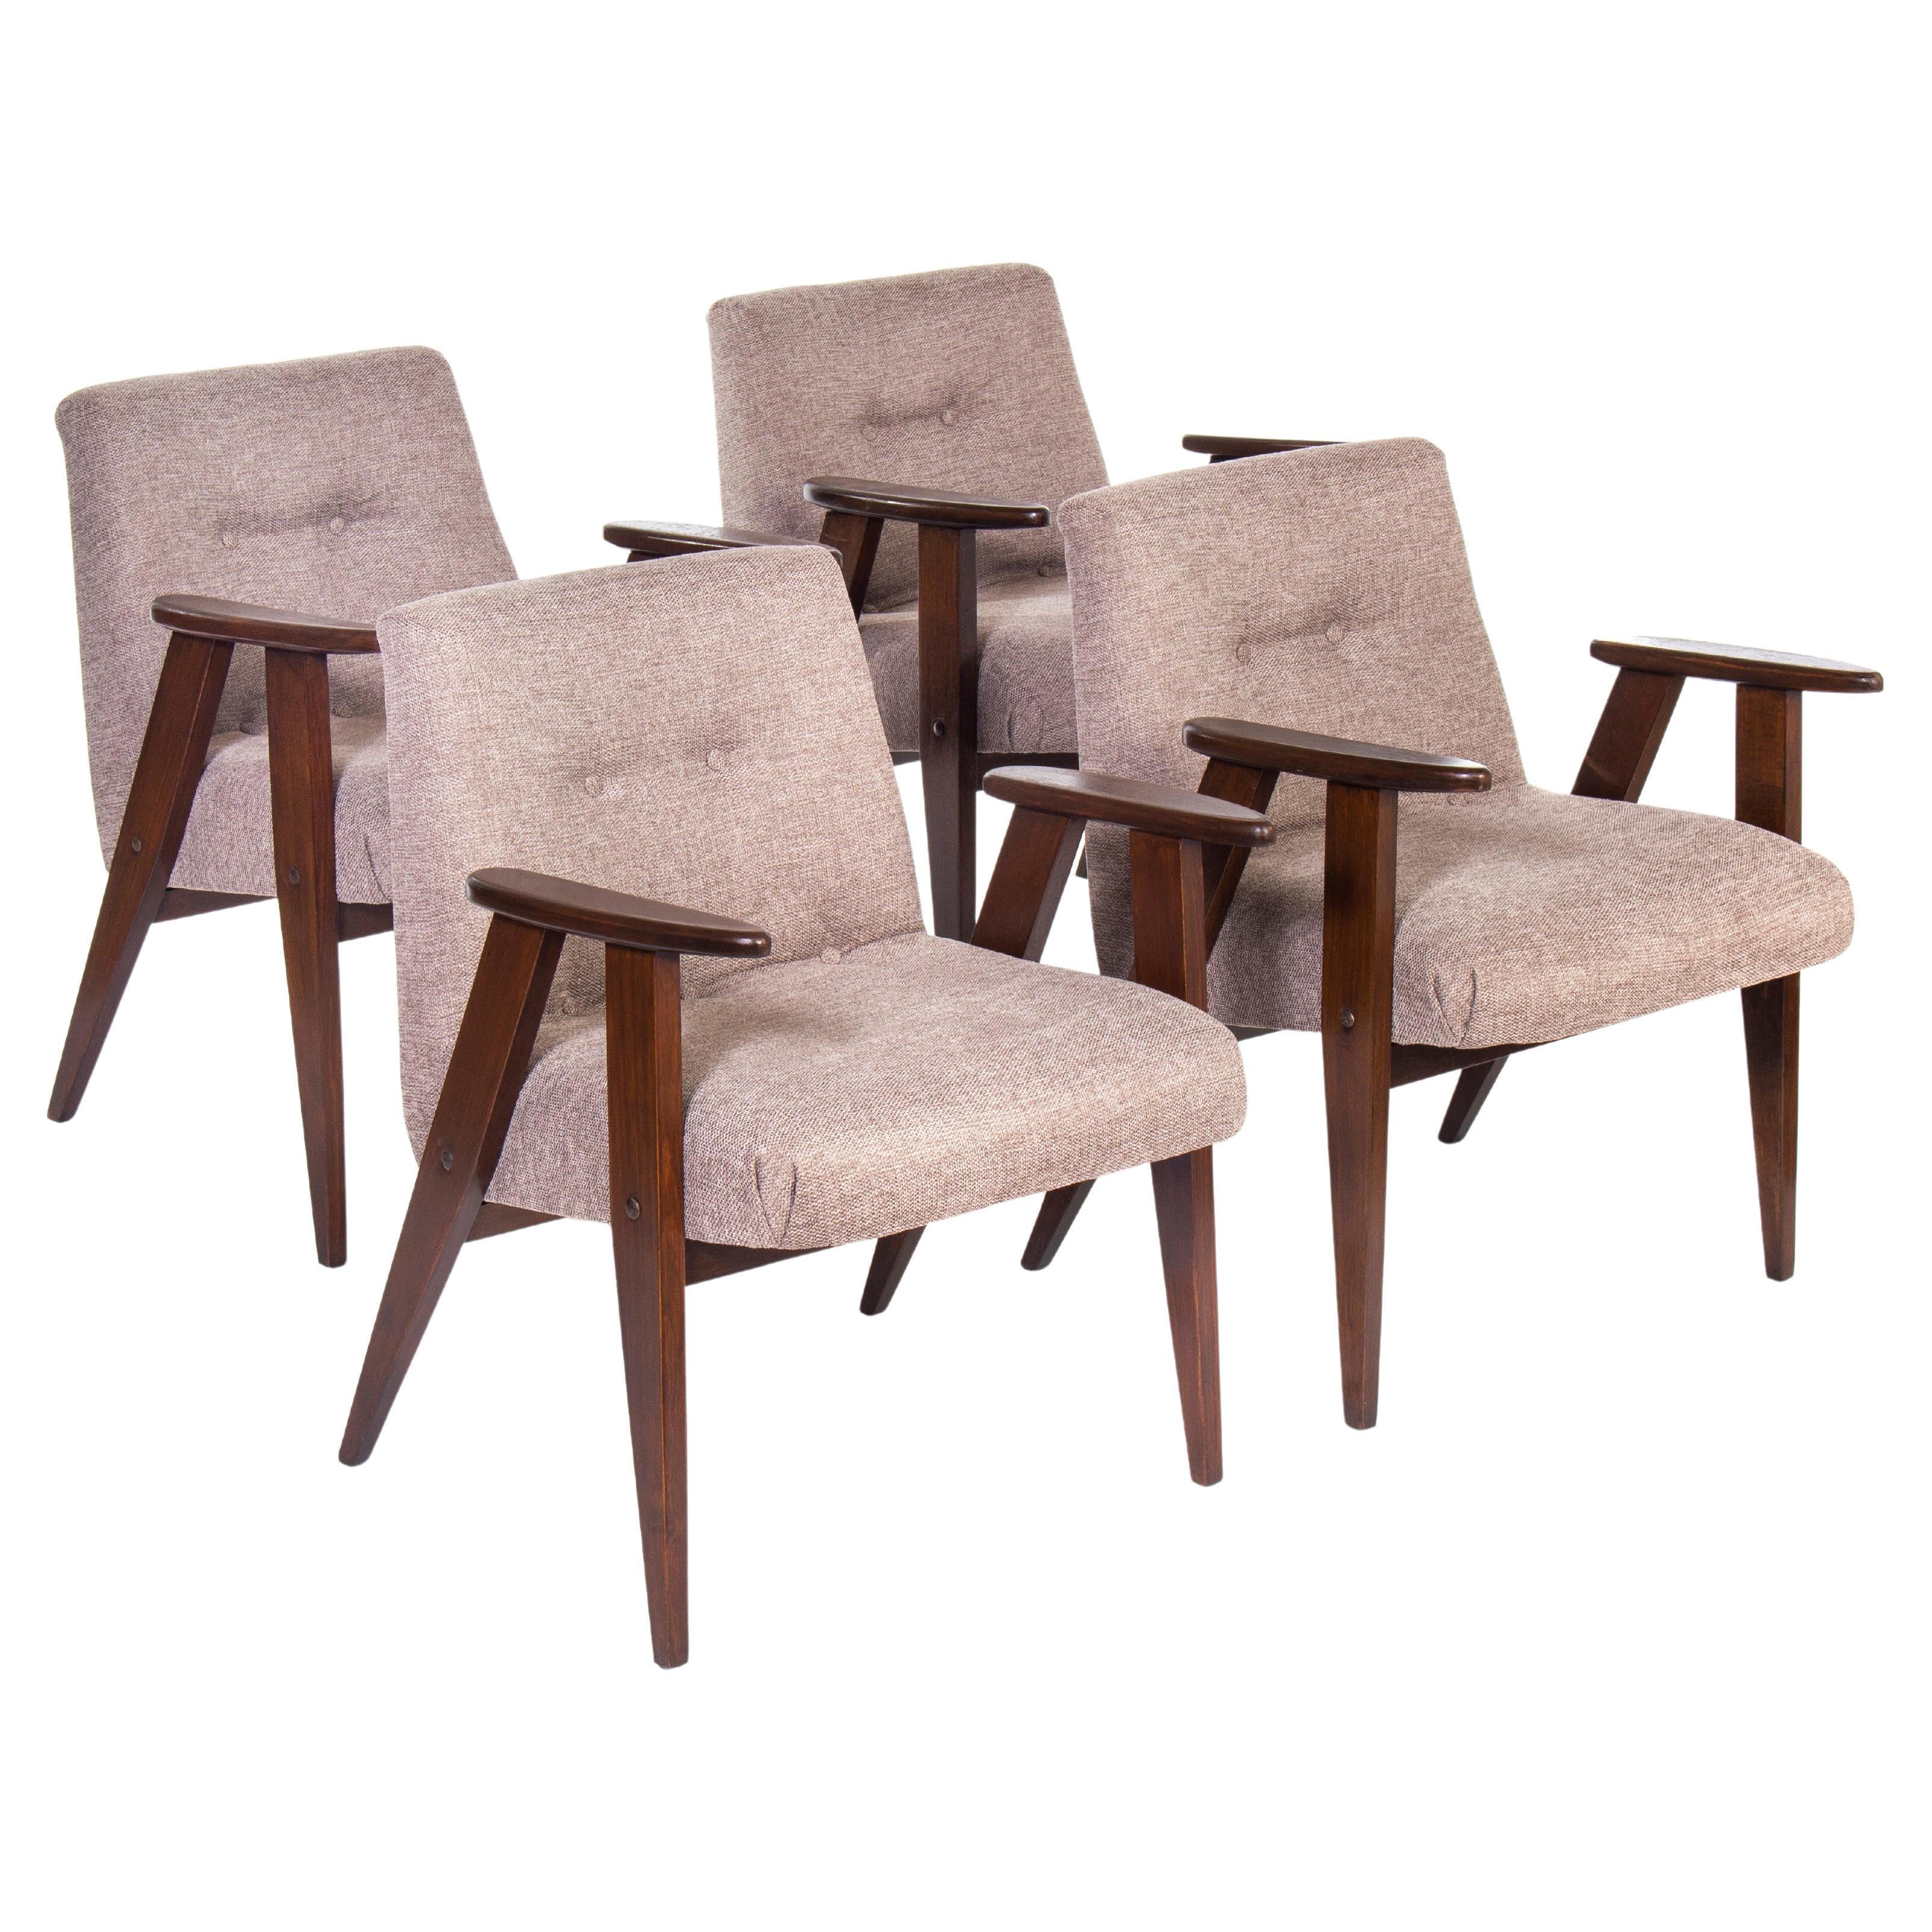 Armchair set of iconic Model No. 366 by Jozef Chierowski.
Compact elegant structure in solid oak, with grey fabric.